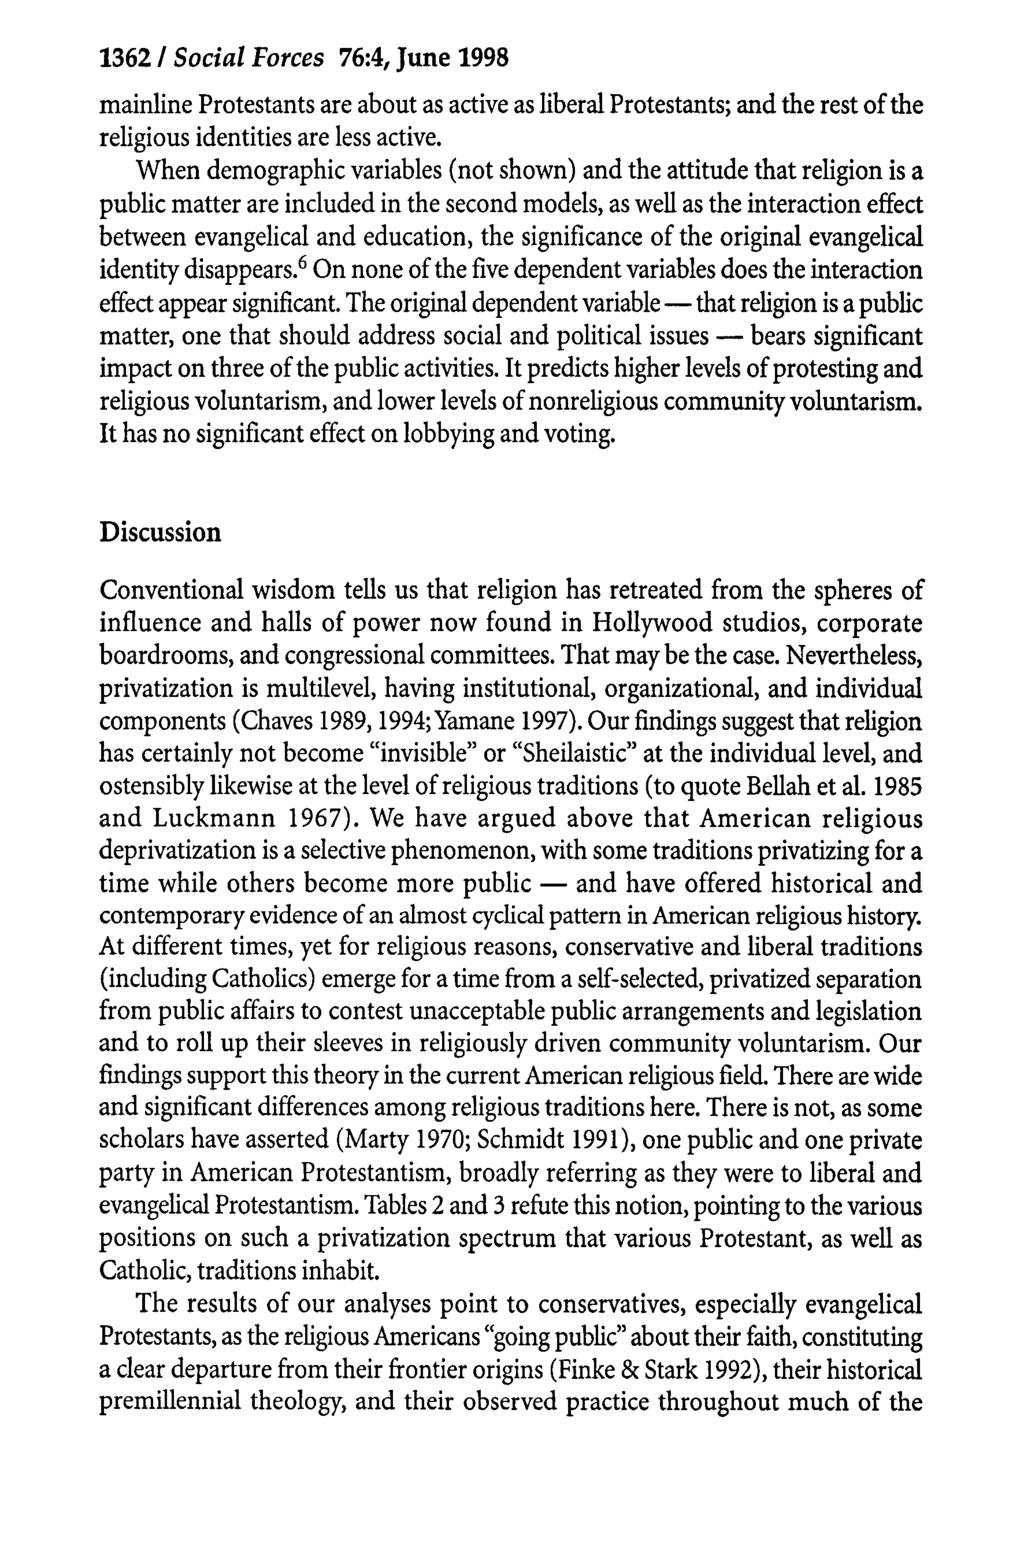 1362 / Social Forces 76:4, June 1998 mainline Protestants are about as active as liberal Protestants; and the rest of the religious identities are less active.